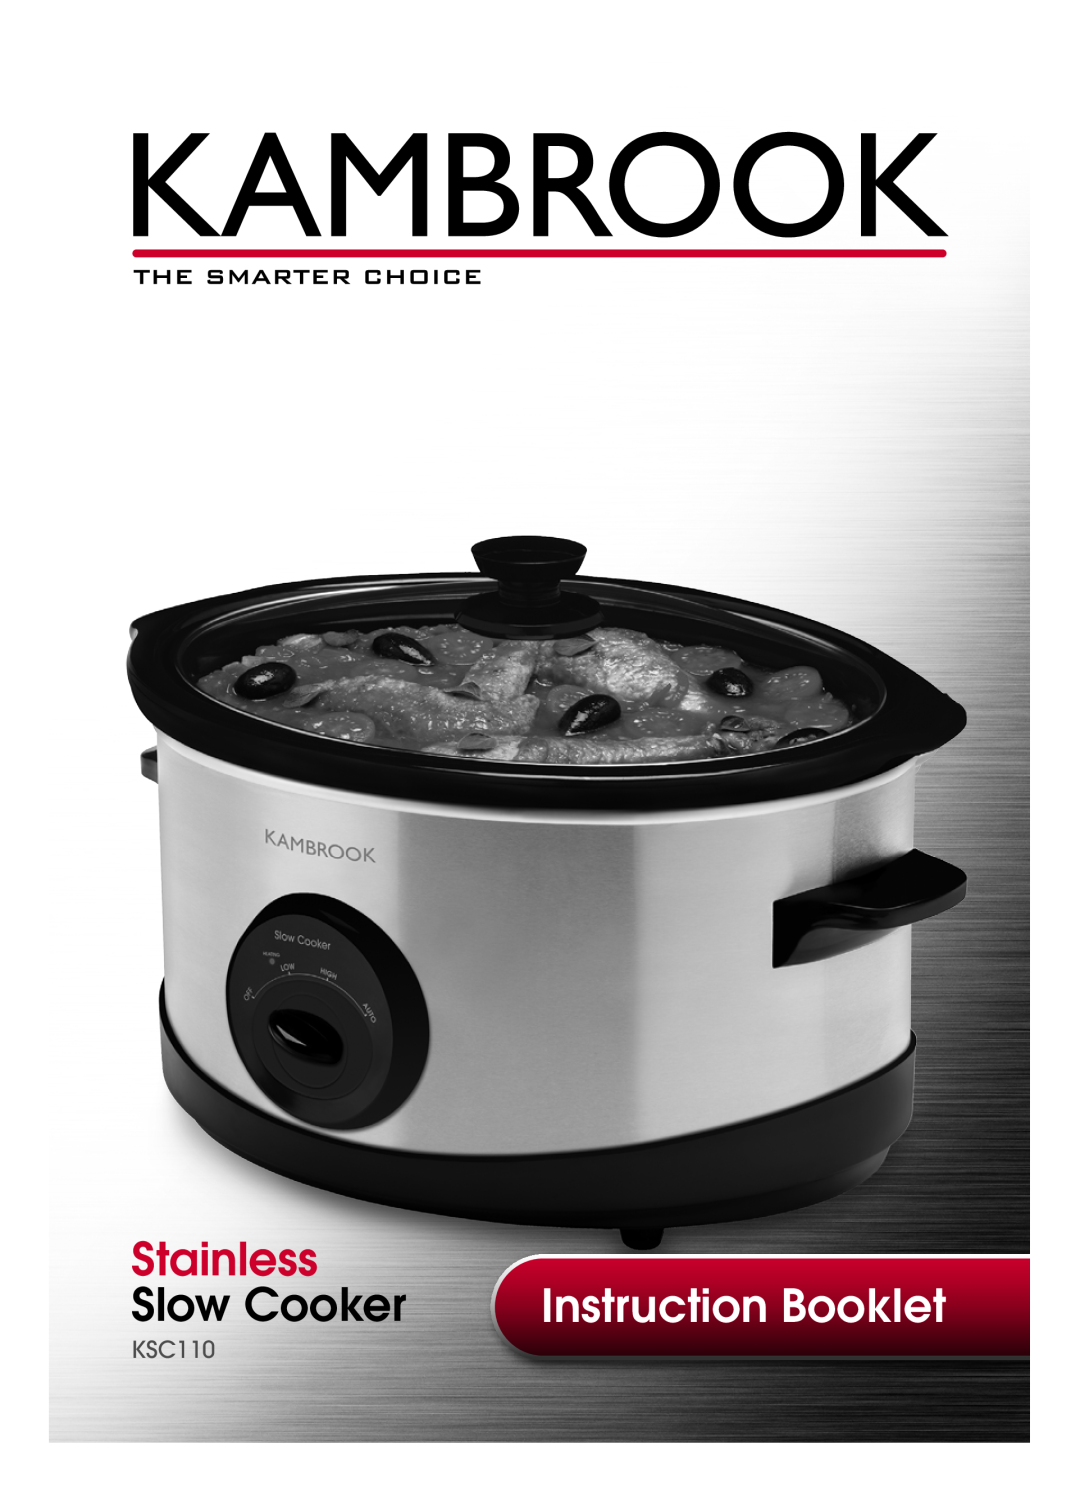 Kambrook KSC110 manual Instruction Booklet, Stainless, Slow Cooker 